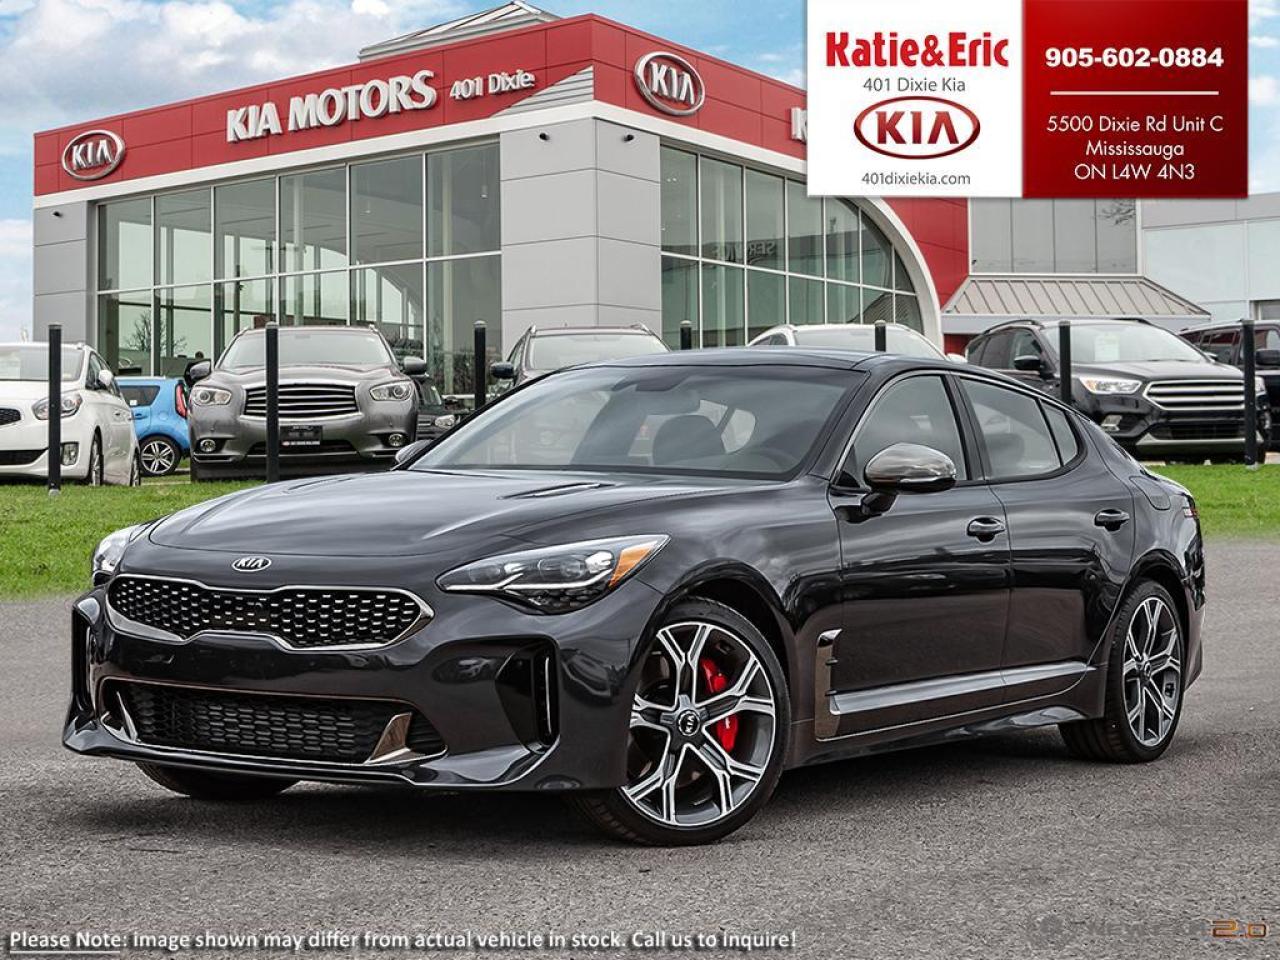 Used 2020 Kia Stinger Gt Limited W Red Interior For Sale In